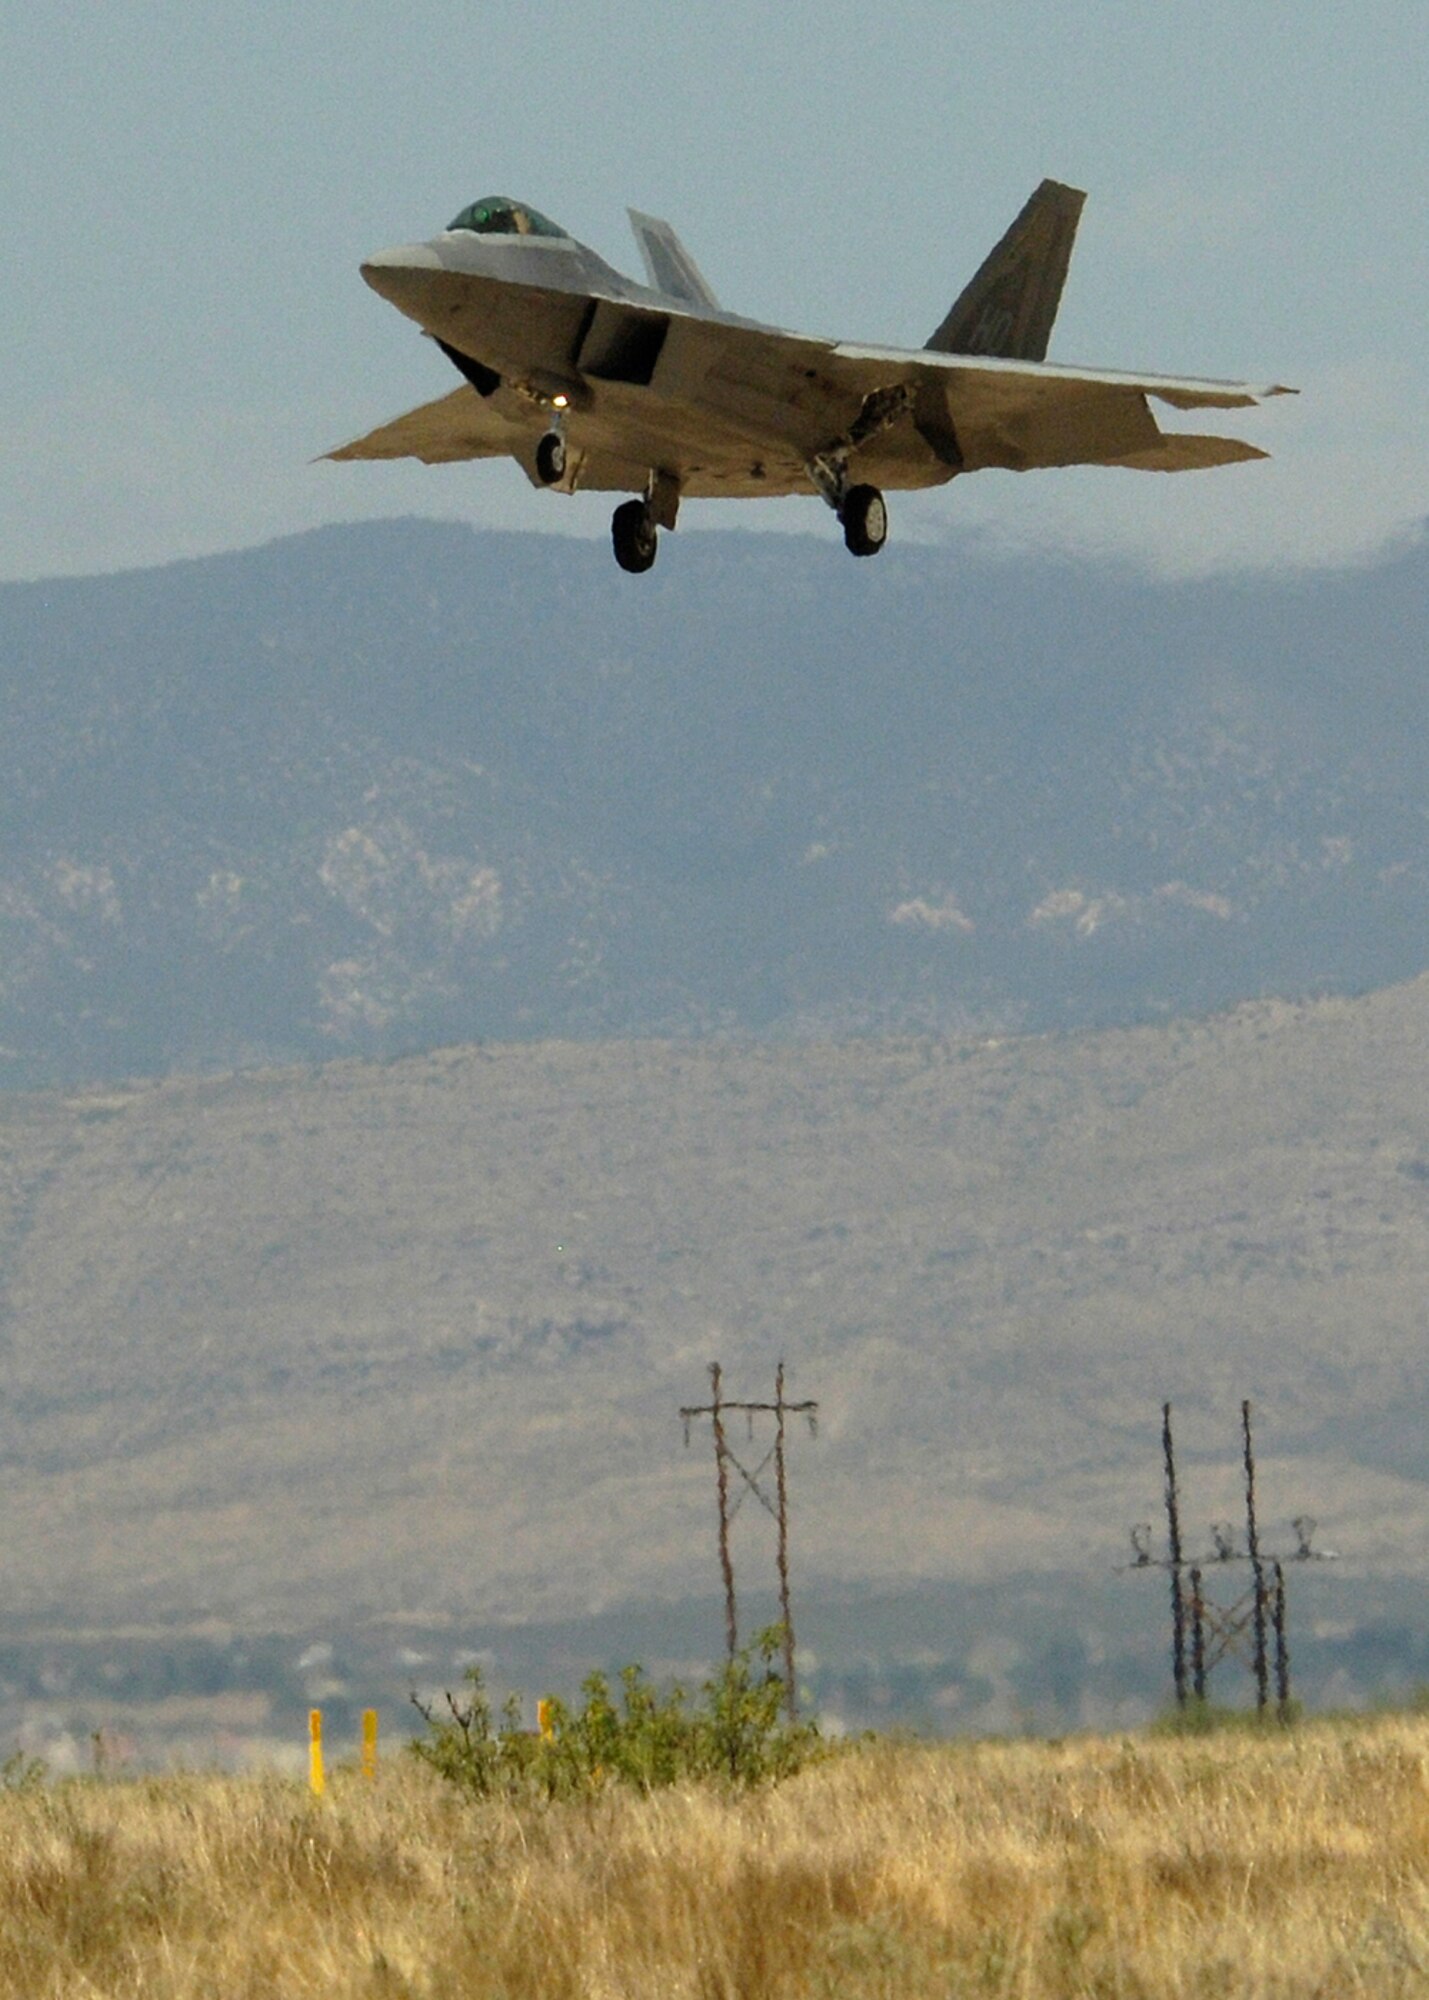 One of two F-22A Raptors land at Holloman Air Force Base, N.M., June 2. The jets flew over the Tularosa Basin prior to landing at Holloman giving the community a chance to witness the future of Holloman. (U.S. Air Force photo/Airman 1st Class Michael Means)